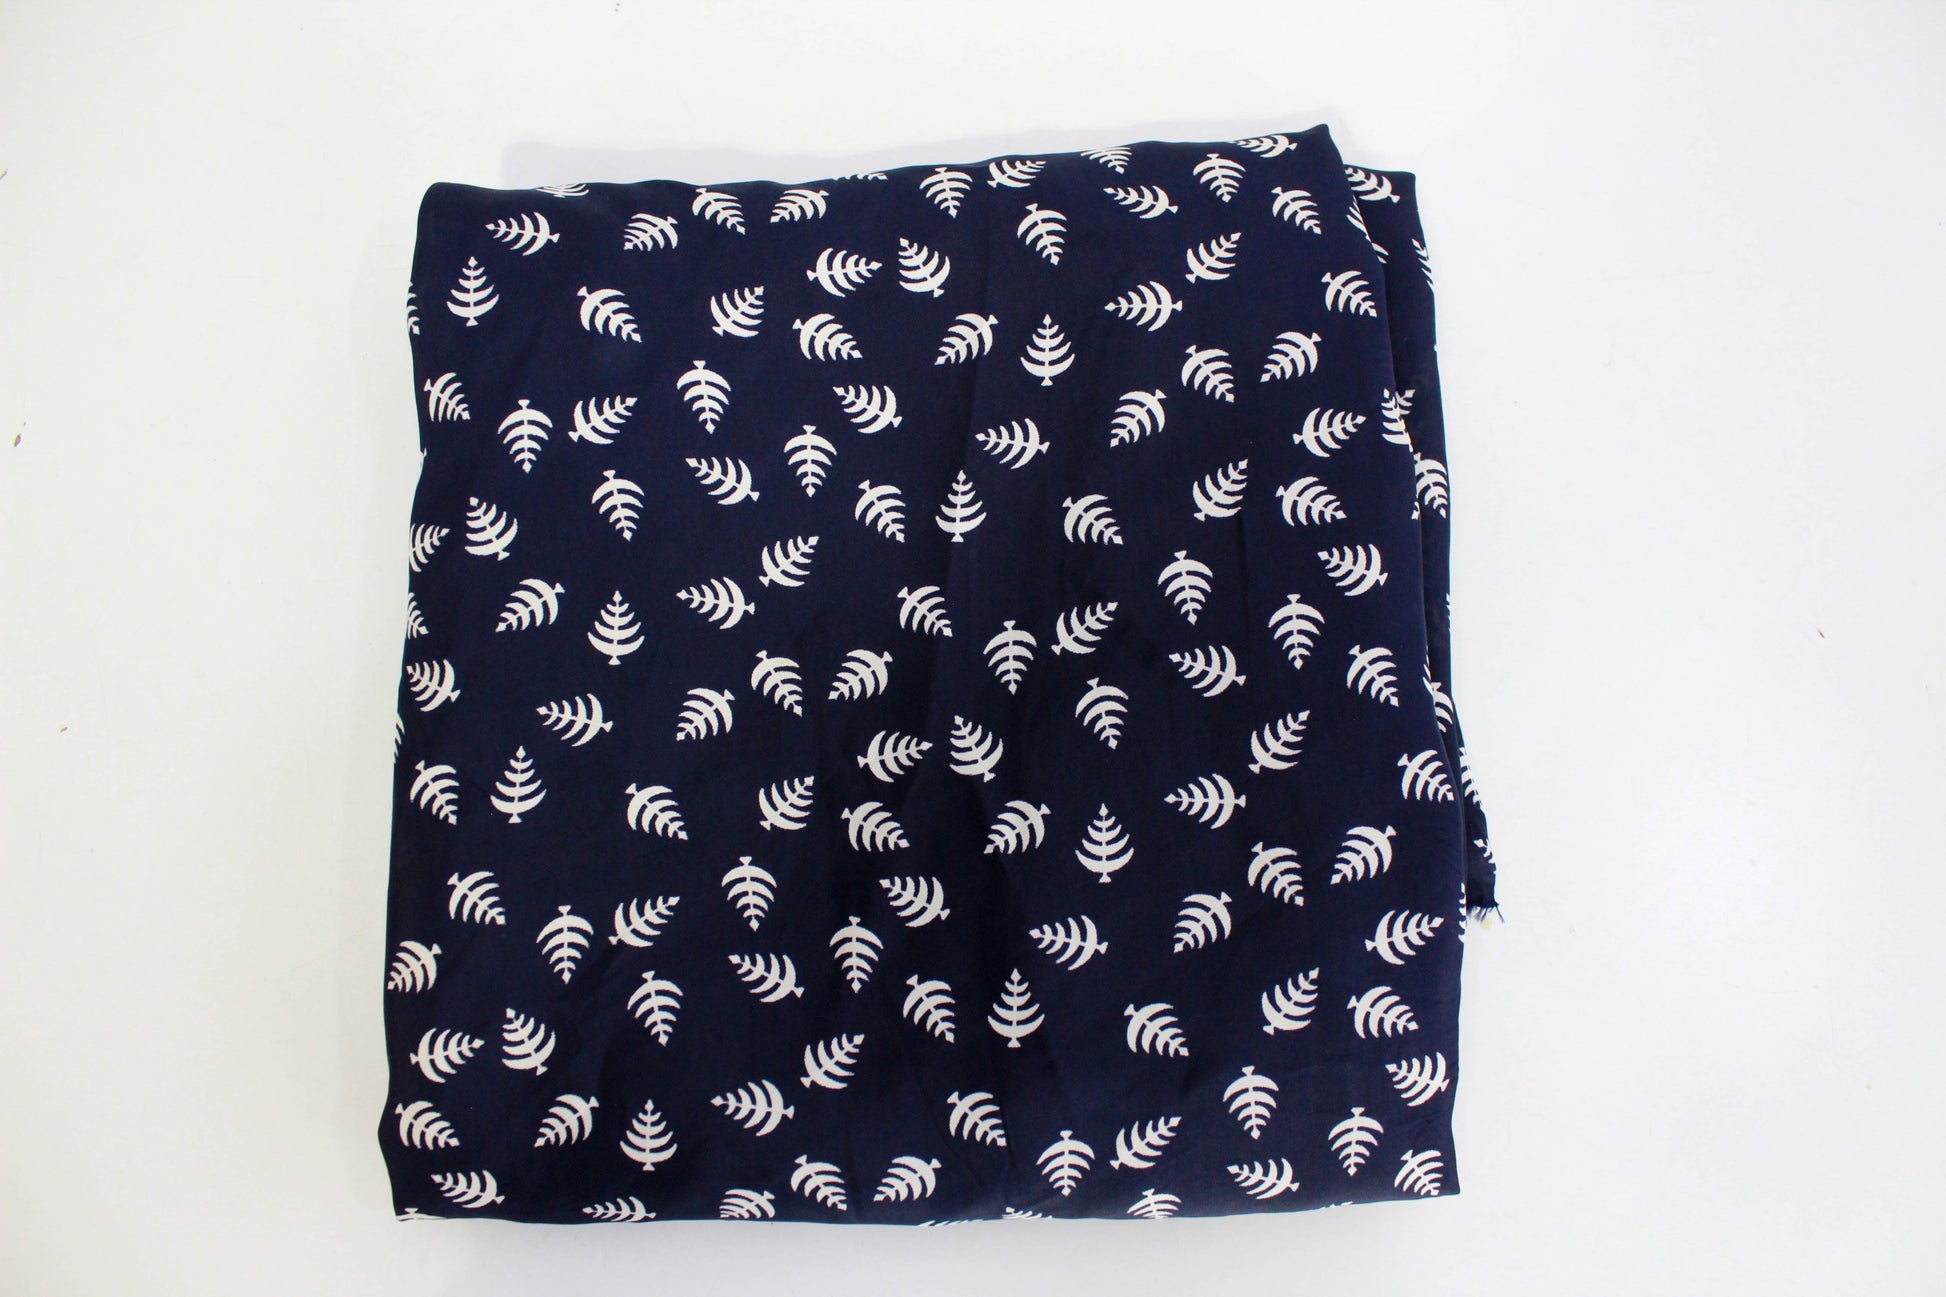 1940s navy blue rayon sewing fabric with white tree print